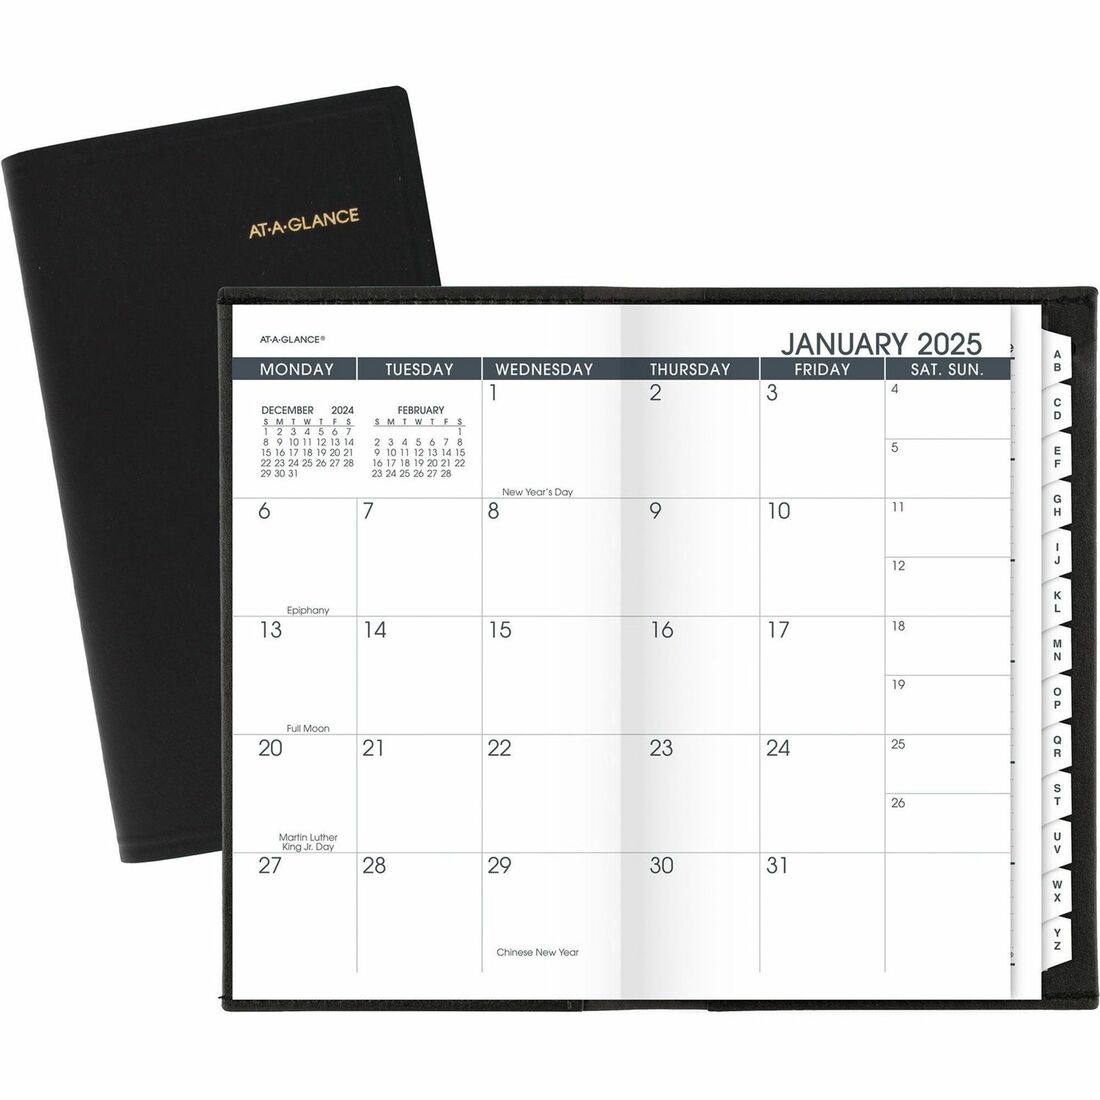 At-A-Glance 2024 Monthly Planner, Black, Pocket, 3 1/2" x 6" - Monthly - 13 Month - January 2024 - January - 1 Month Double Page Layout - 3 1/2" x 6 1/8" Sheet Size - Black - Simulated Leather, Faux Leather - Pocket, Phone Directory, Unruled Daily Bl - 1